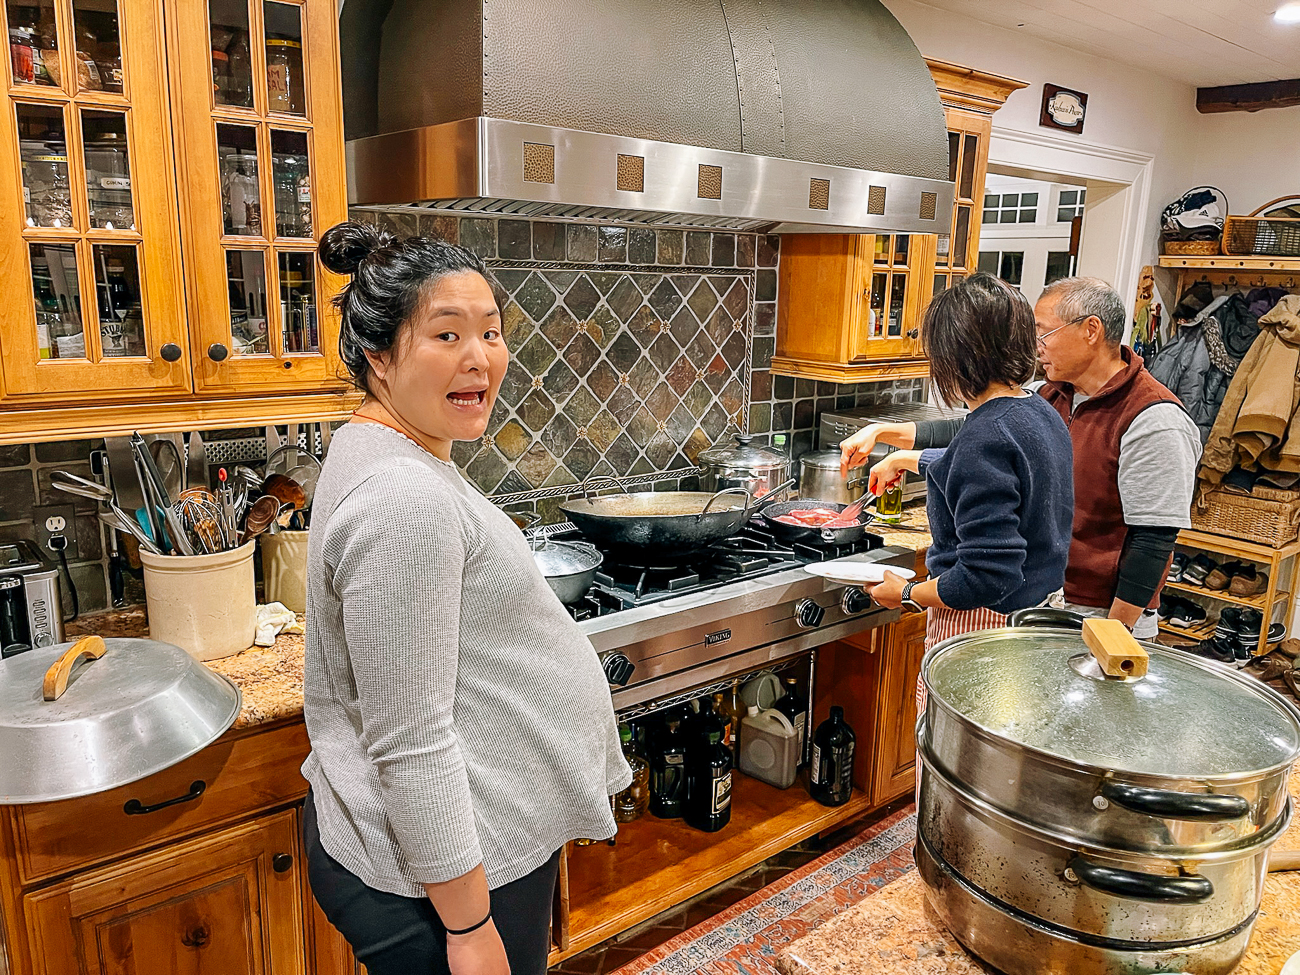 Sarah baby bump with Judy and Bill in kitchen